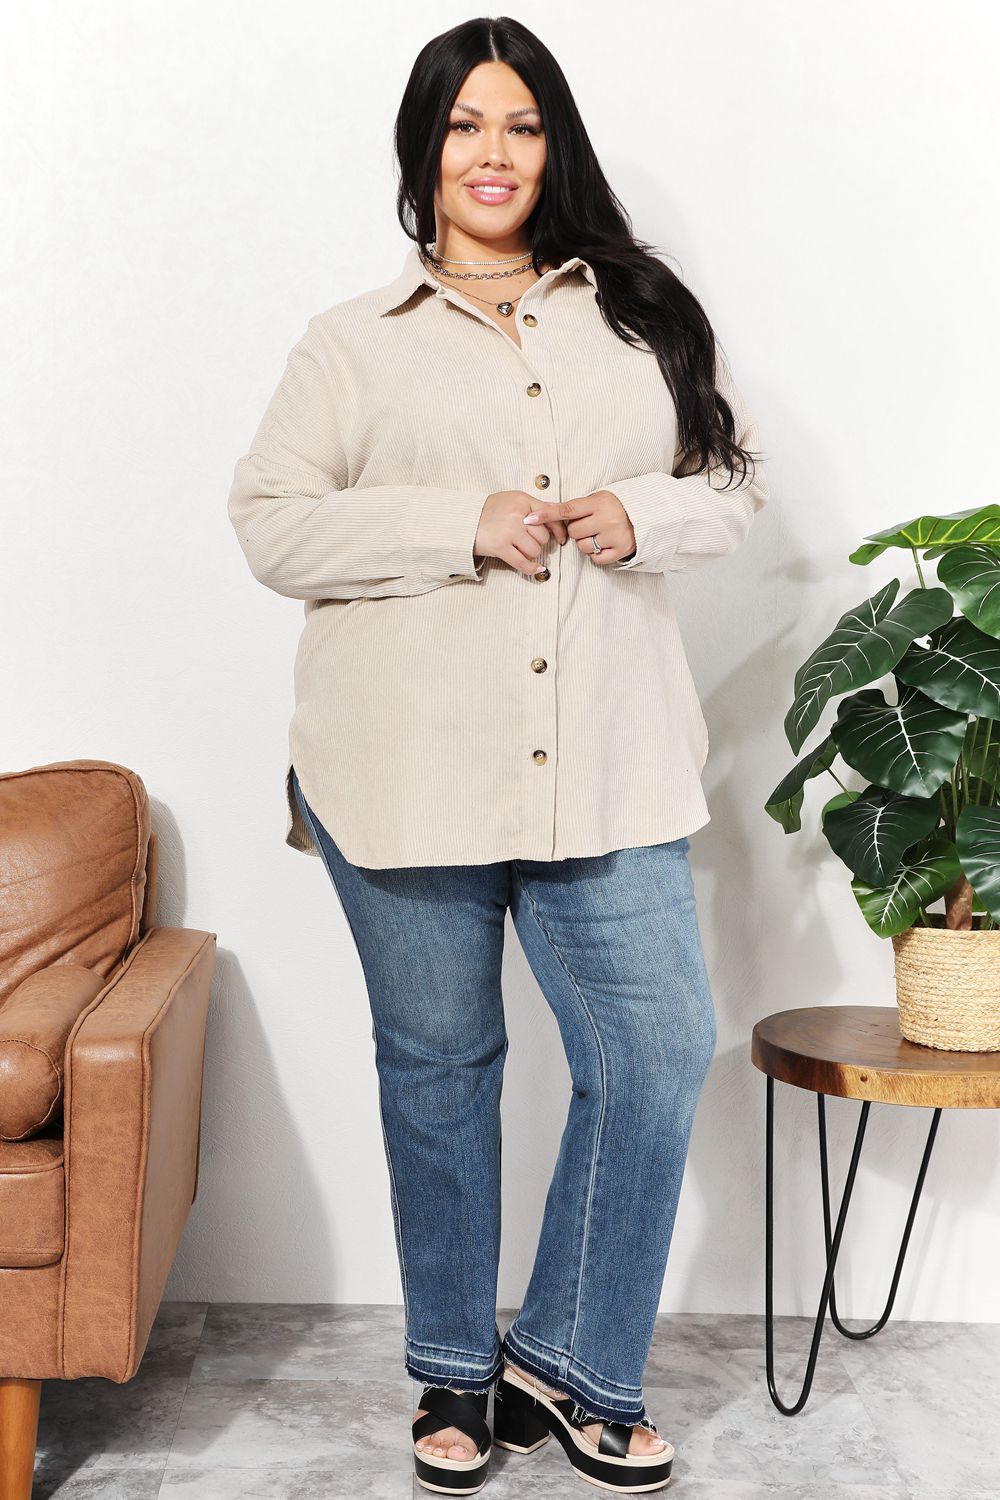 HEYSON Full Size Oversized Corduroy Button-Down Tunic Shirt with Bust Pocket | us.meeeshop